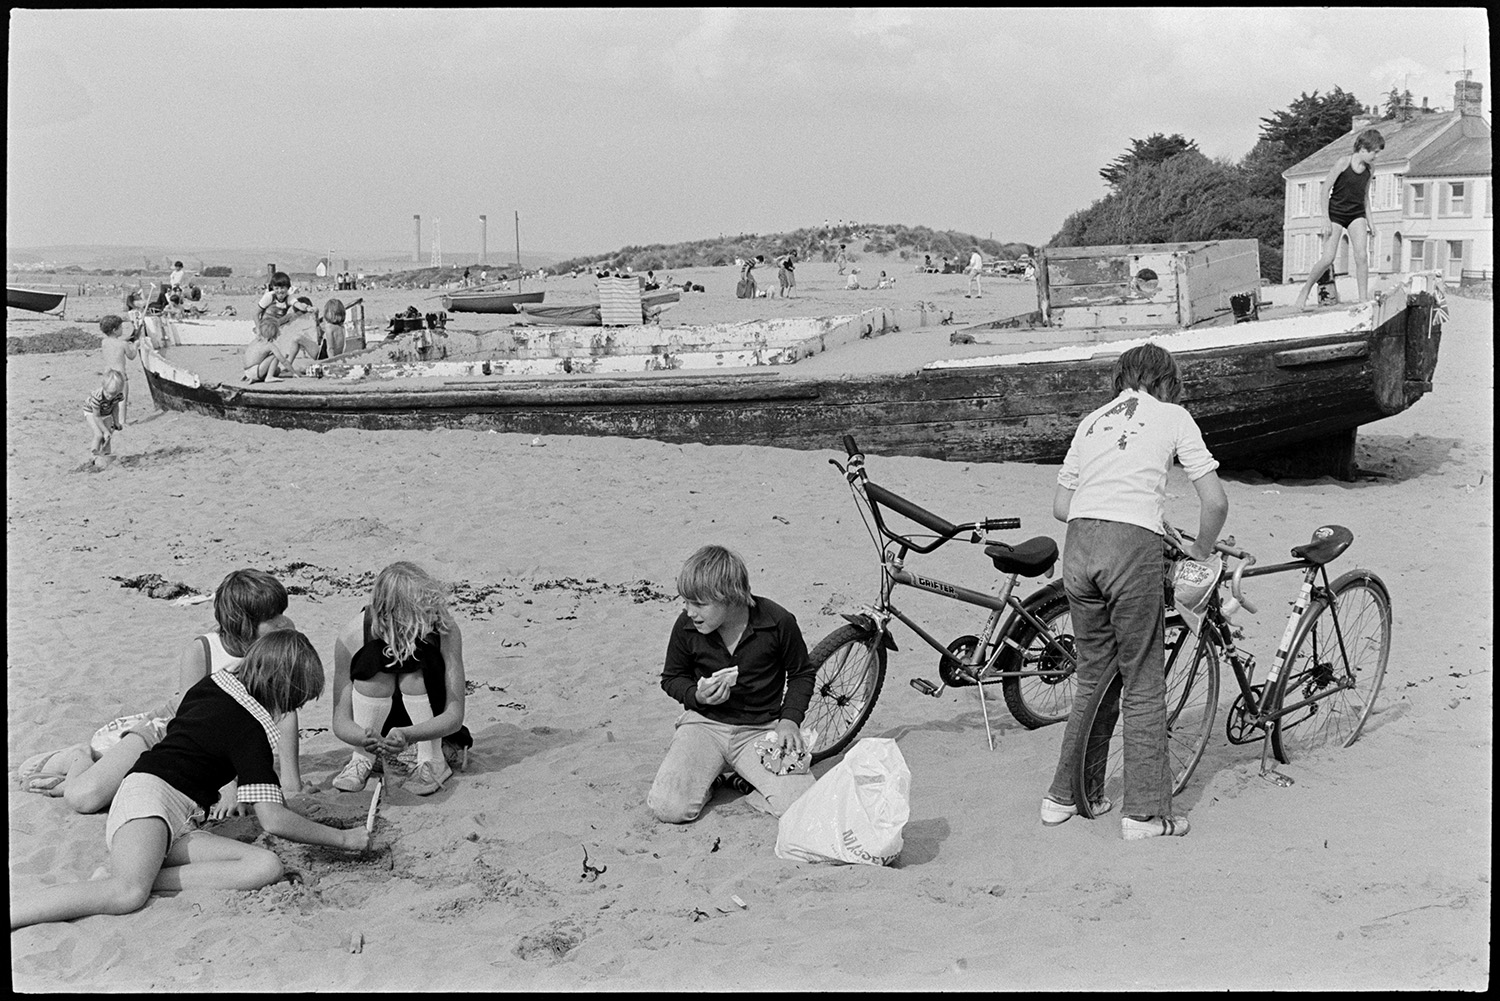 Beach with children playing on beached barge. 
[Children playing on the beach at Instow. One boy is eating a sandwich and another is looking in a bag attached to a bicycle. In the background children are playing on a beached barge. ]